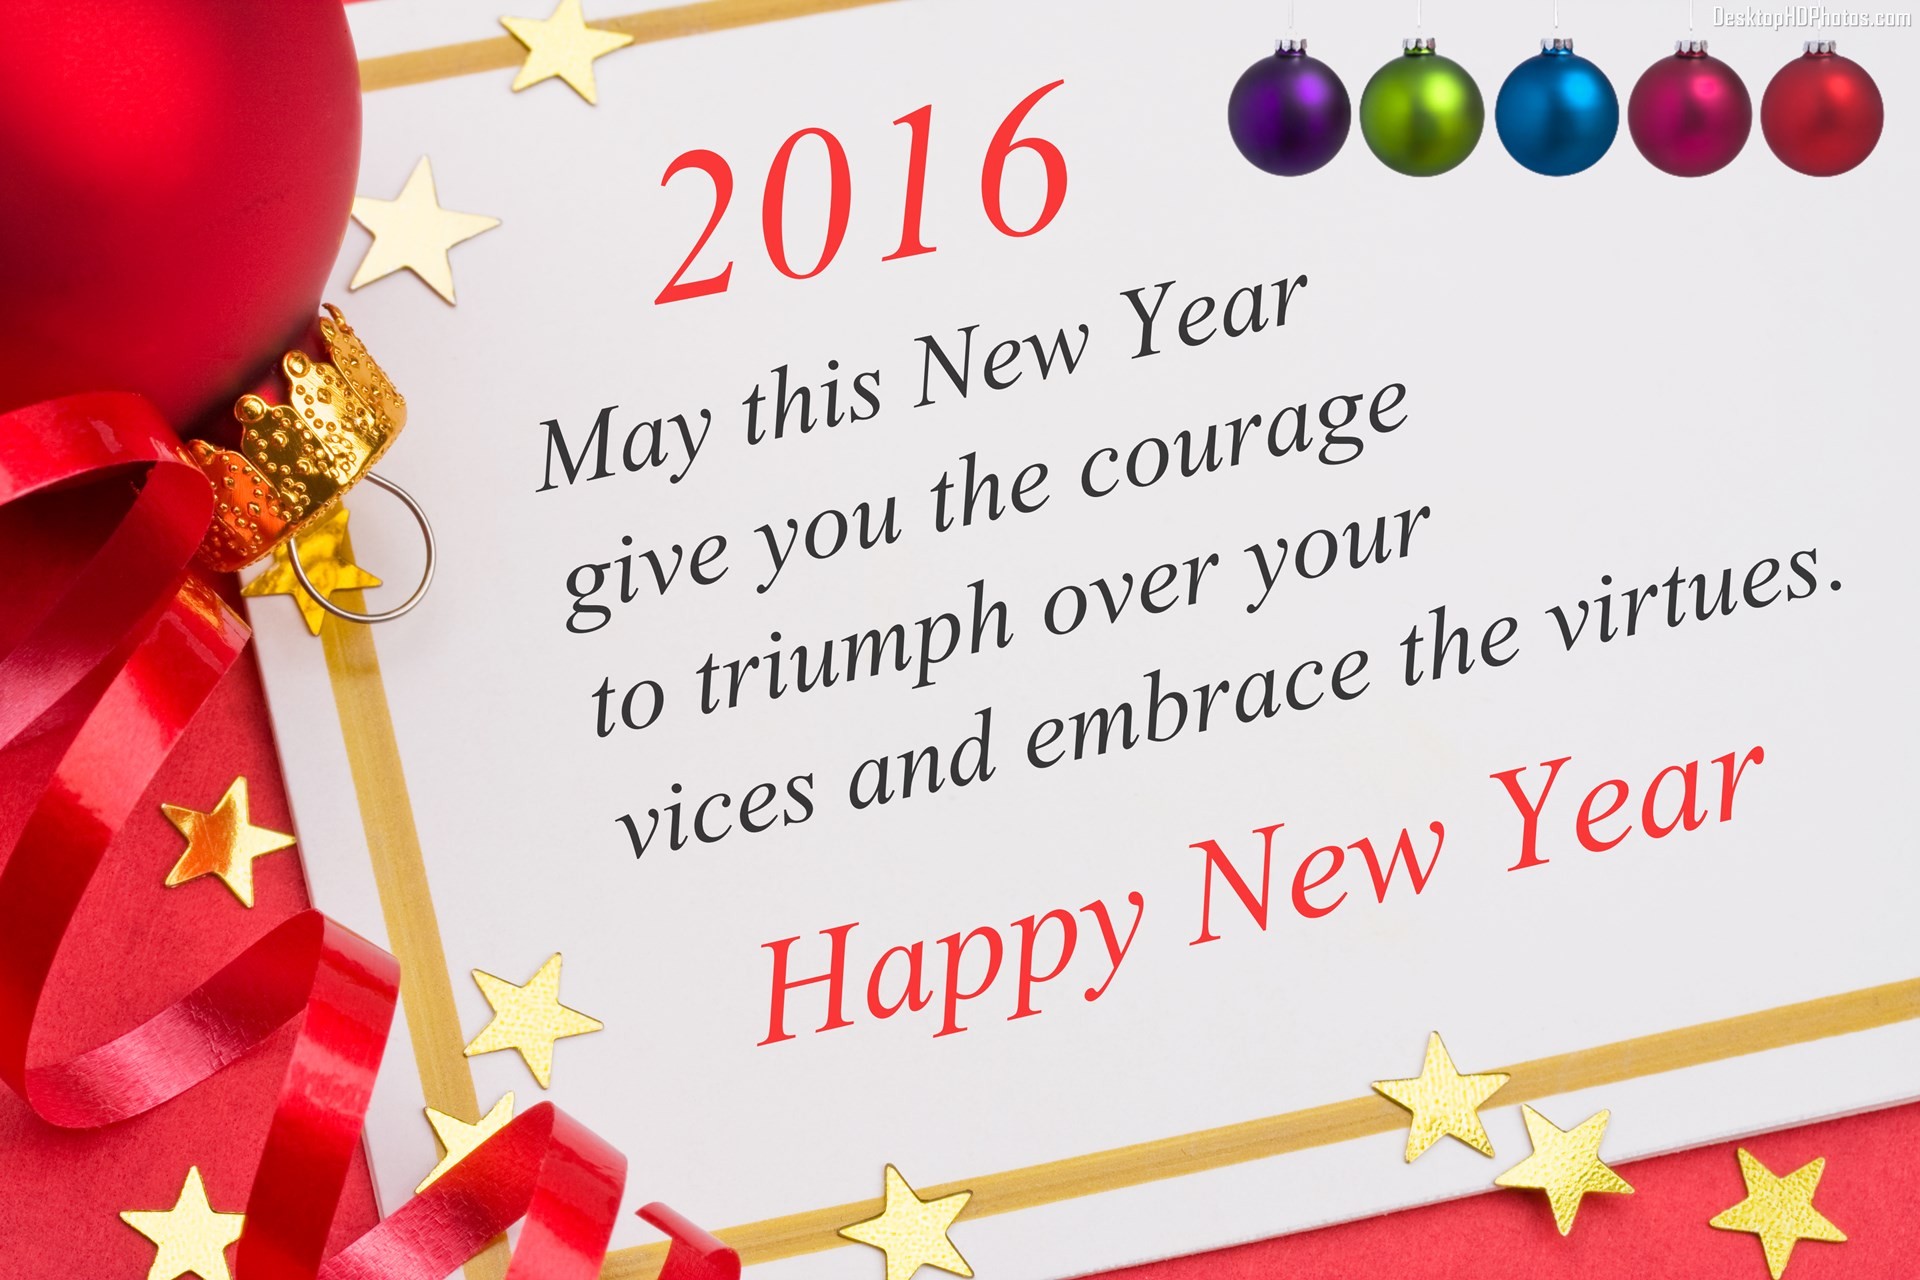 Beautiful Happy New Year Wallpapers HD (1)